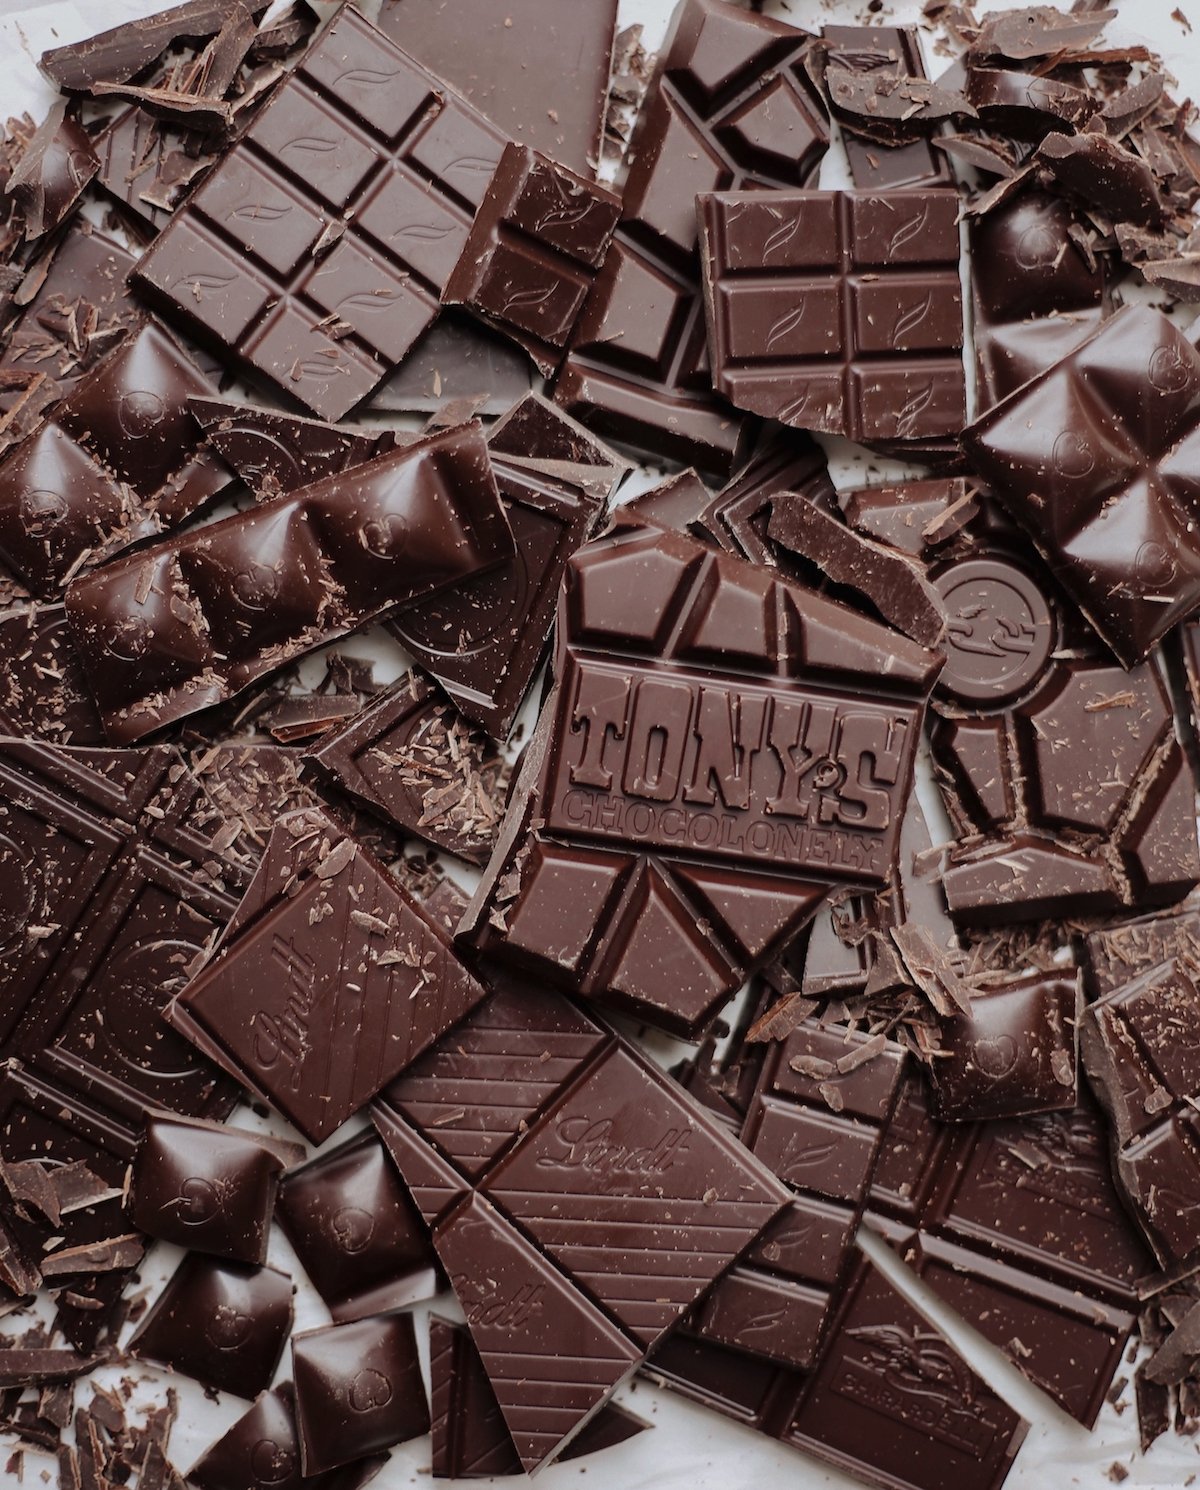 I Tried 6 Grocery Store Dark Chocolate Bars—This Is the One I’ll Keep in My Candy Drawer